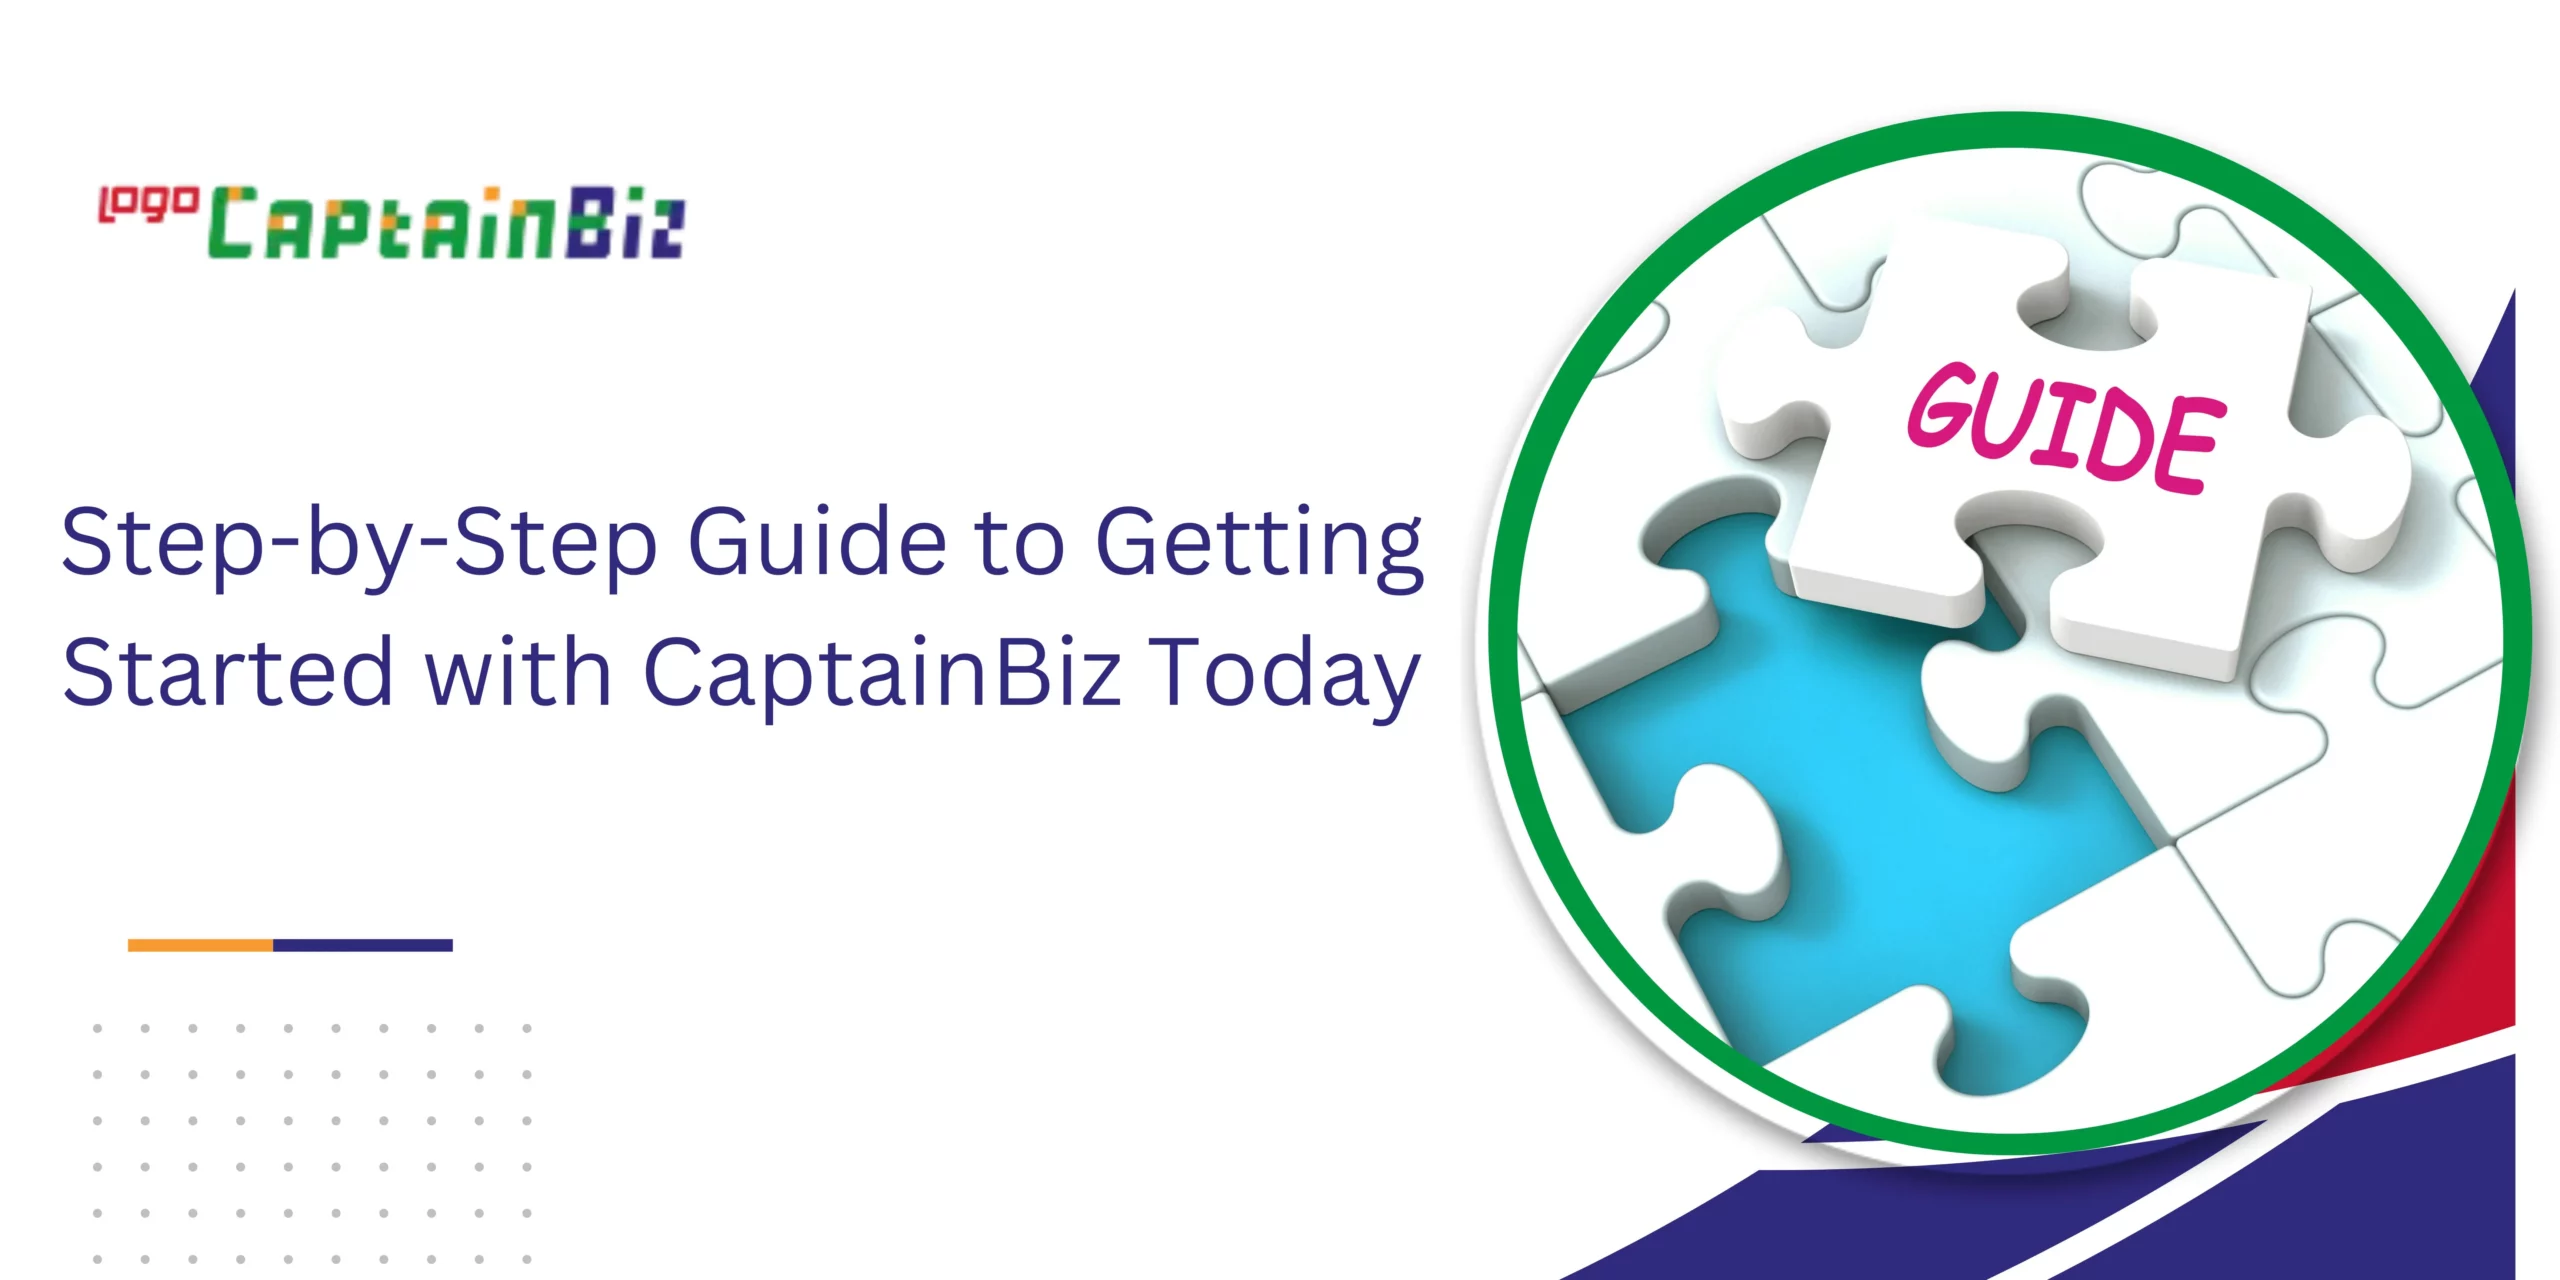 CaptainBIz: Step-by-Step Guide to Getting Started with CaptainBiz Today